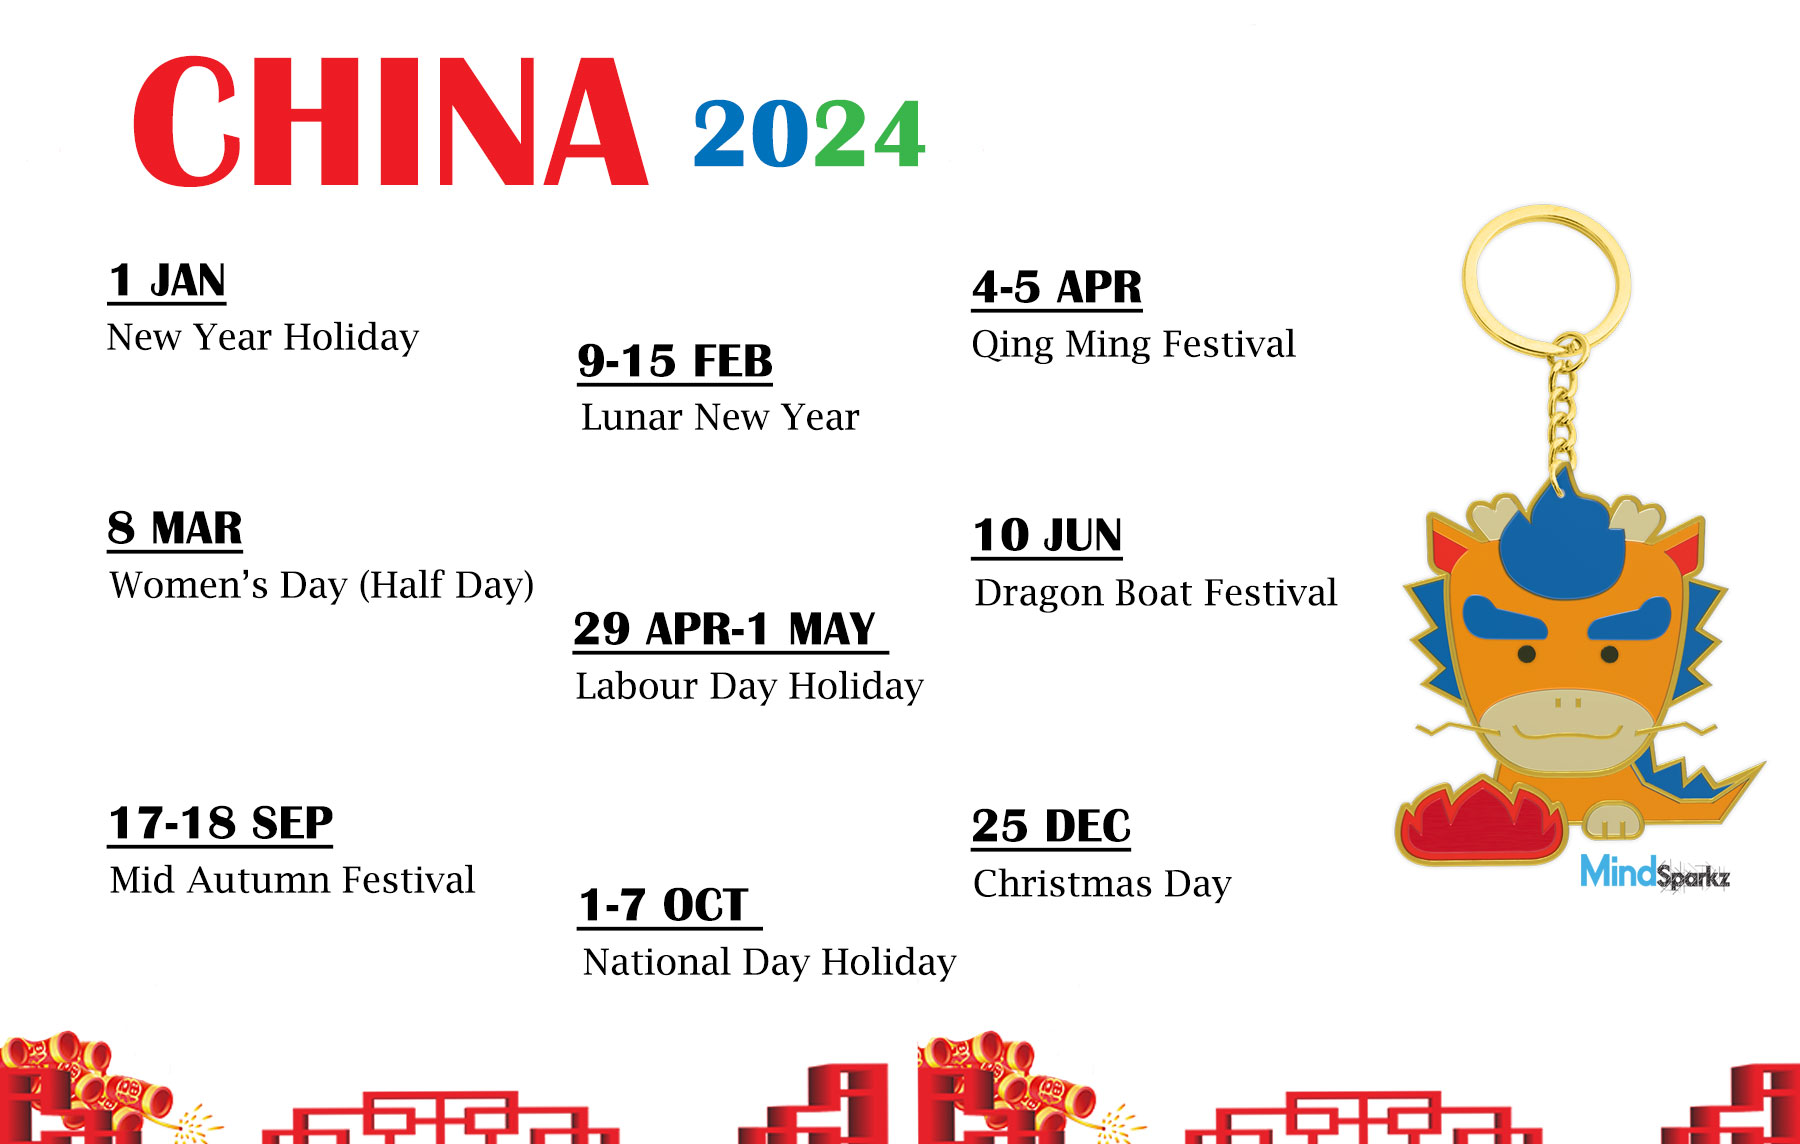 Chinese New Year 2024 in London - Special Event 